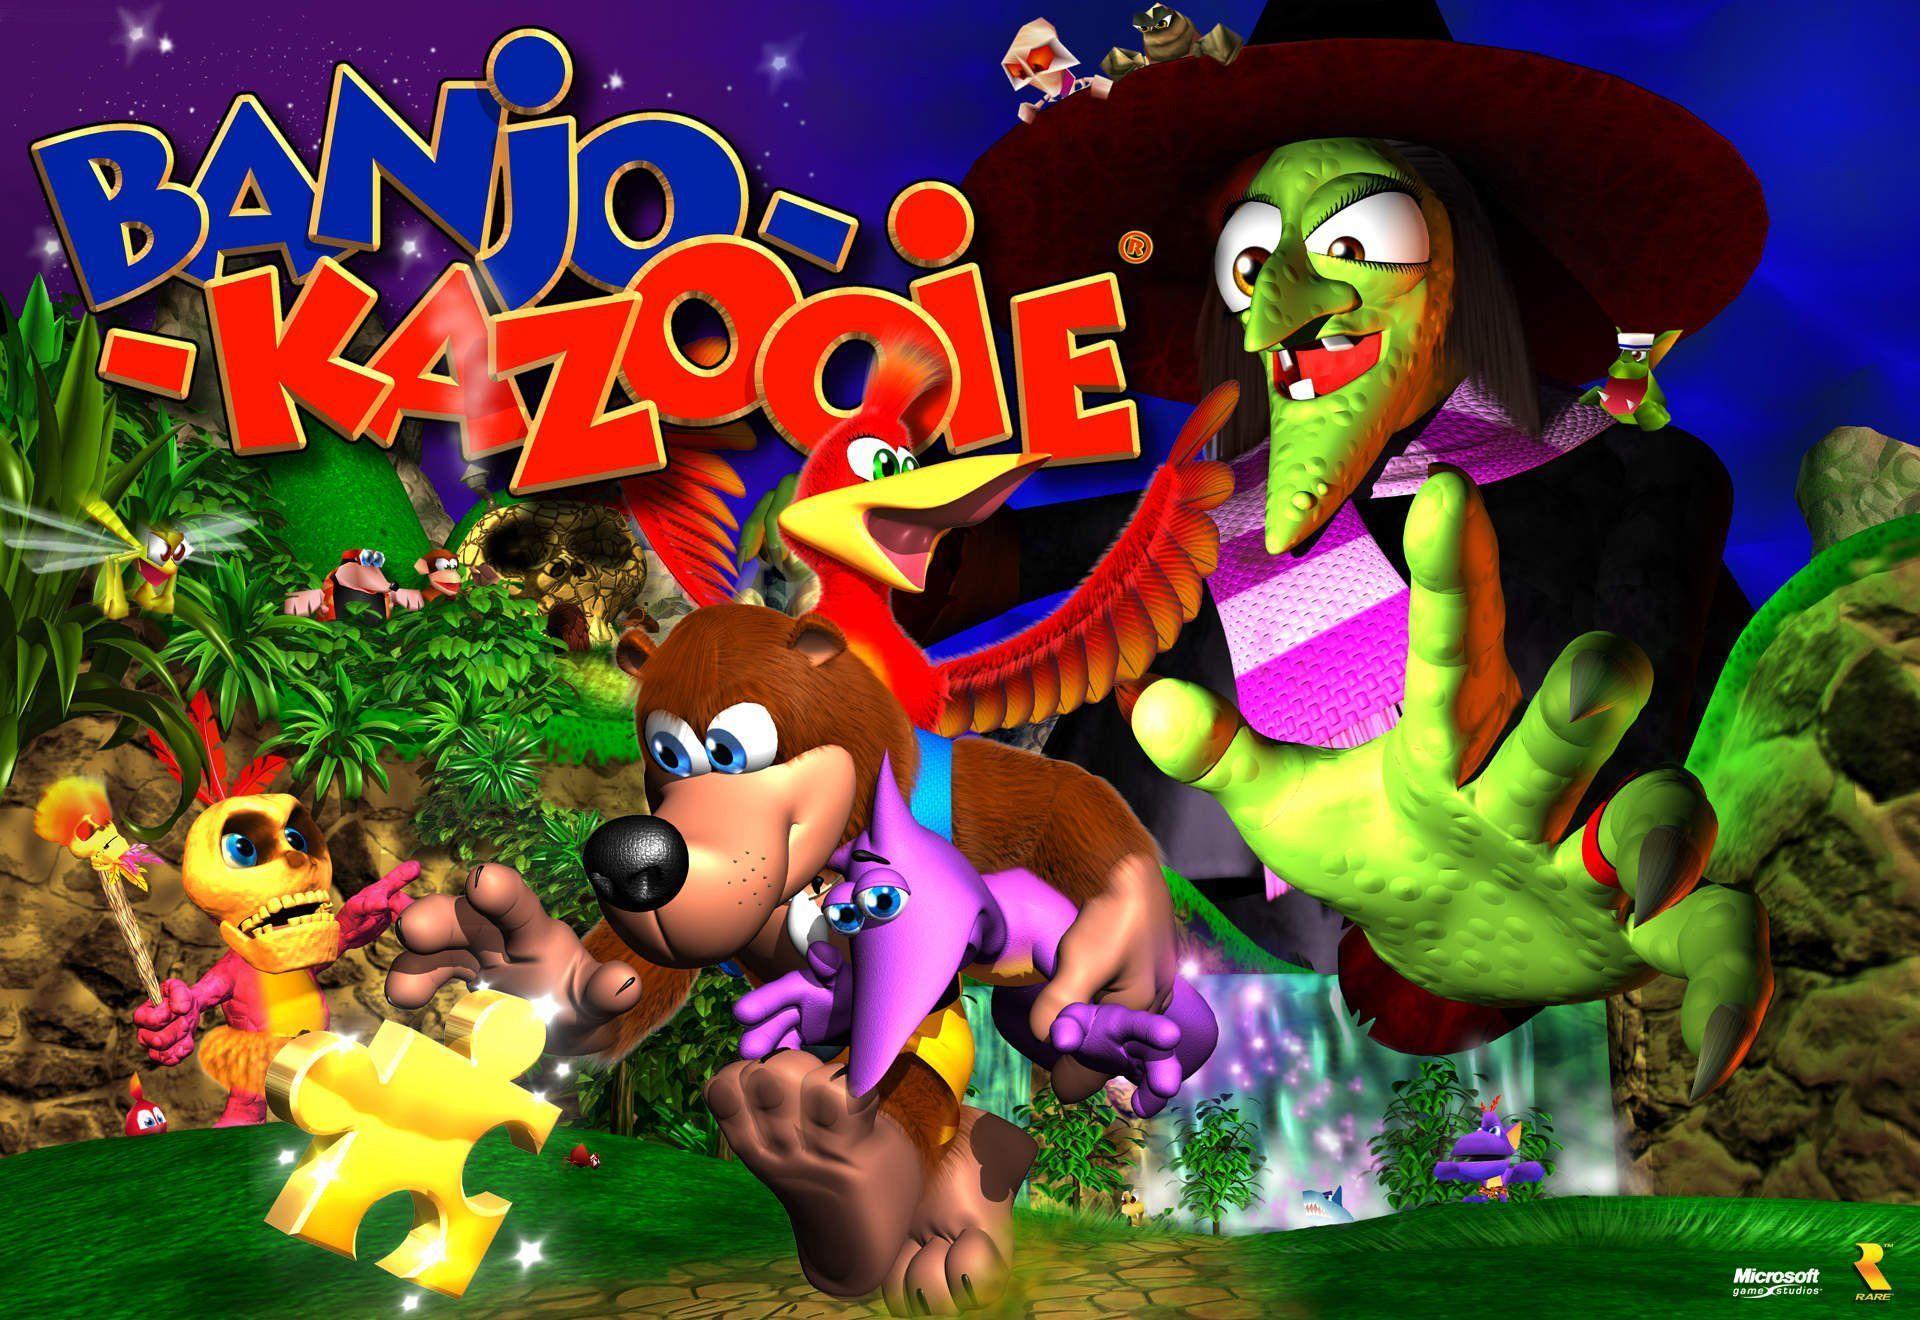 Banjo Kazooie and Paper Mario Nintendo Switch Releases Announced